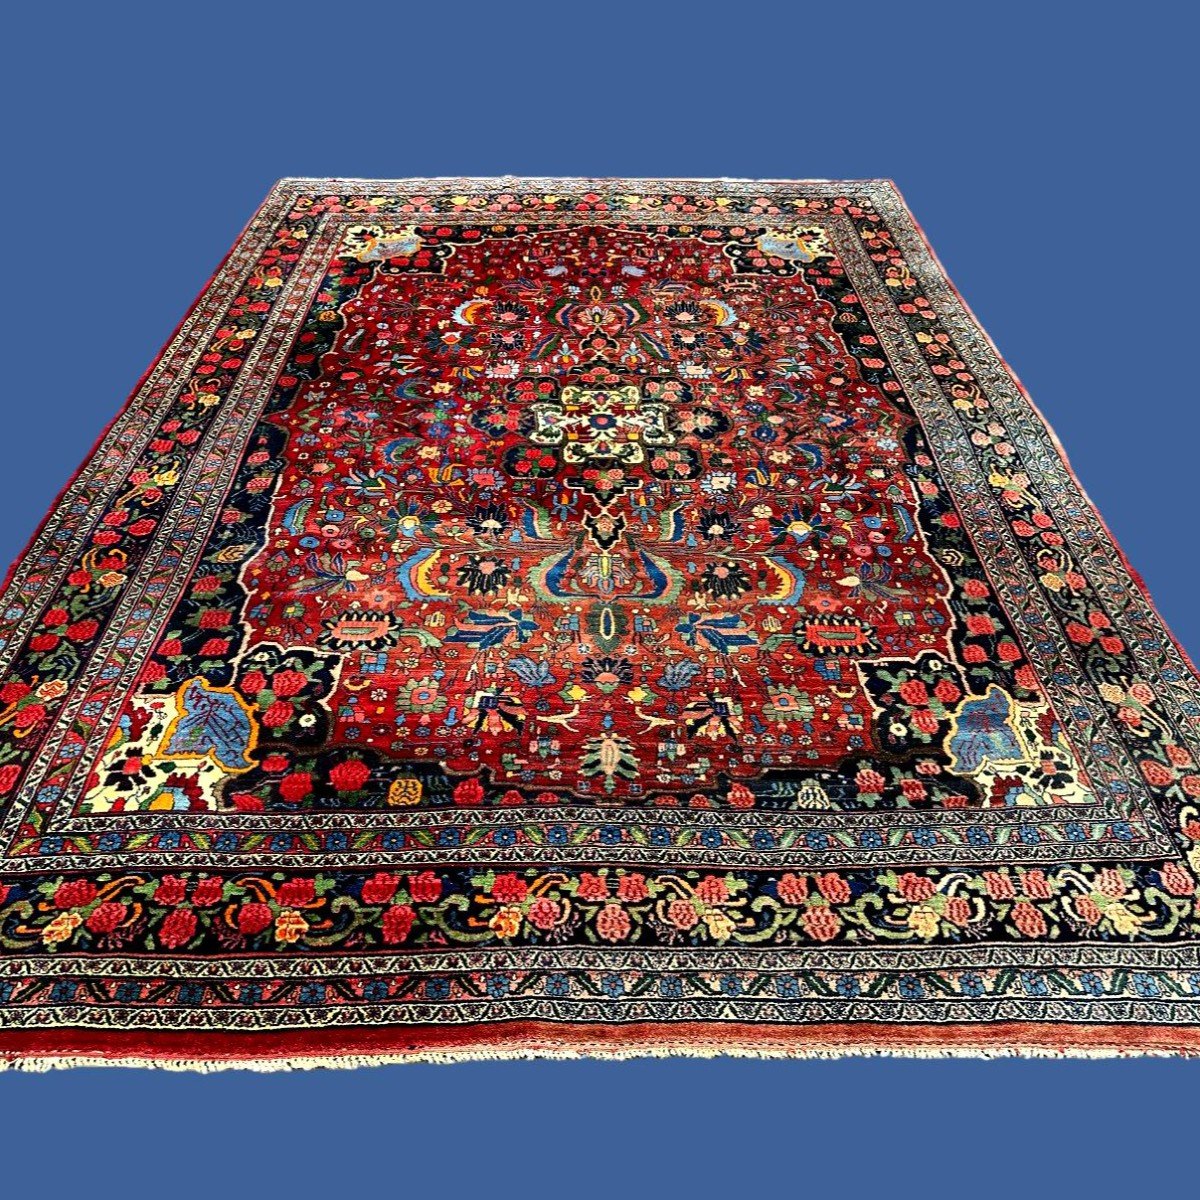 Old Bidjar Rug, 270 X 355 Cm, Hand-knotted Wool Circa 1920-1930 In Iran, In Very Good Condition -photo-3